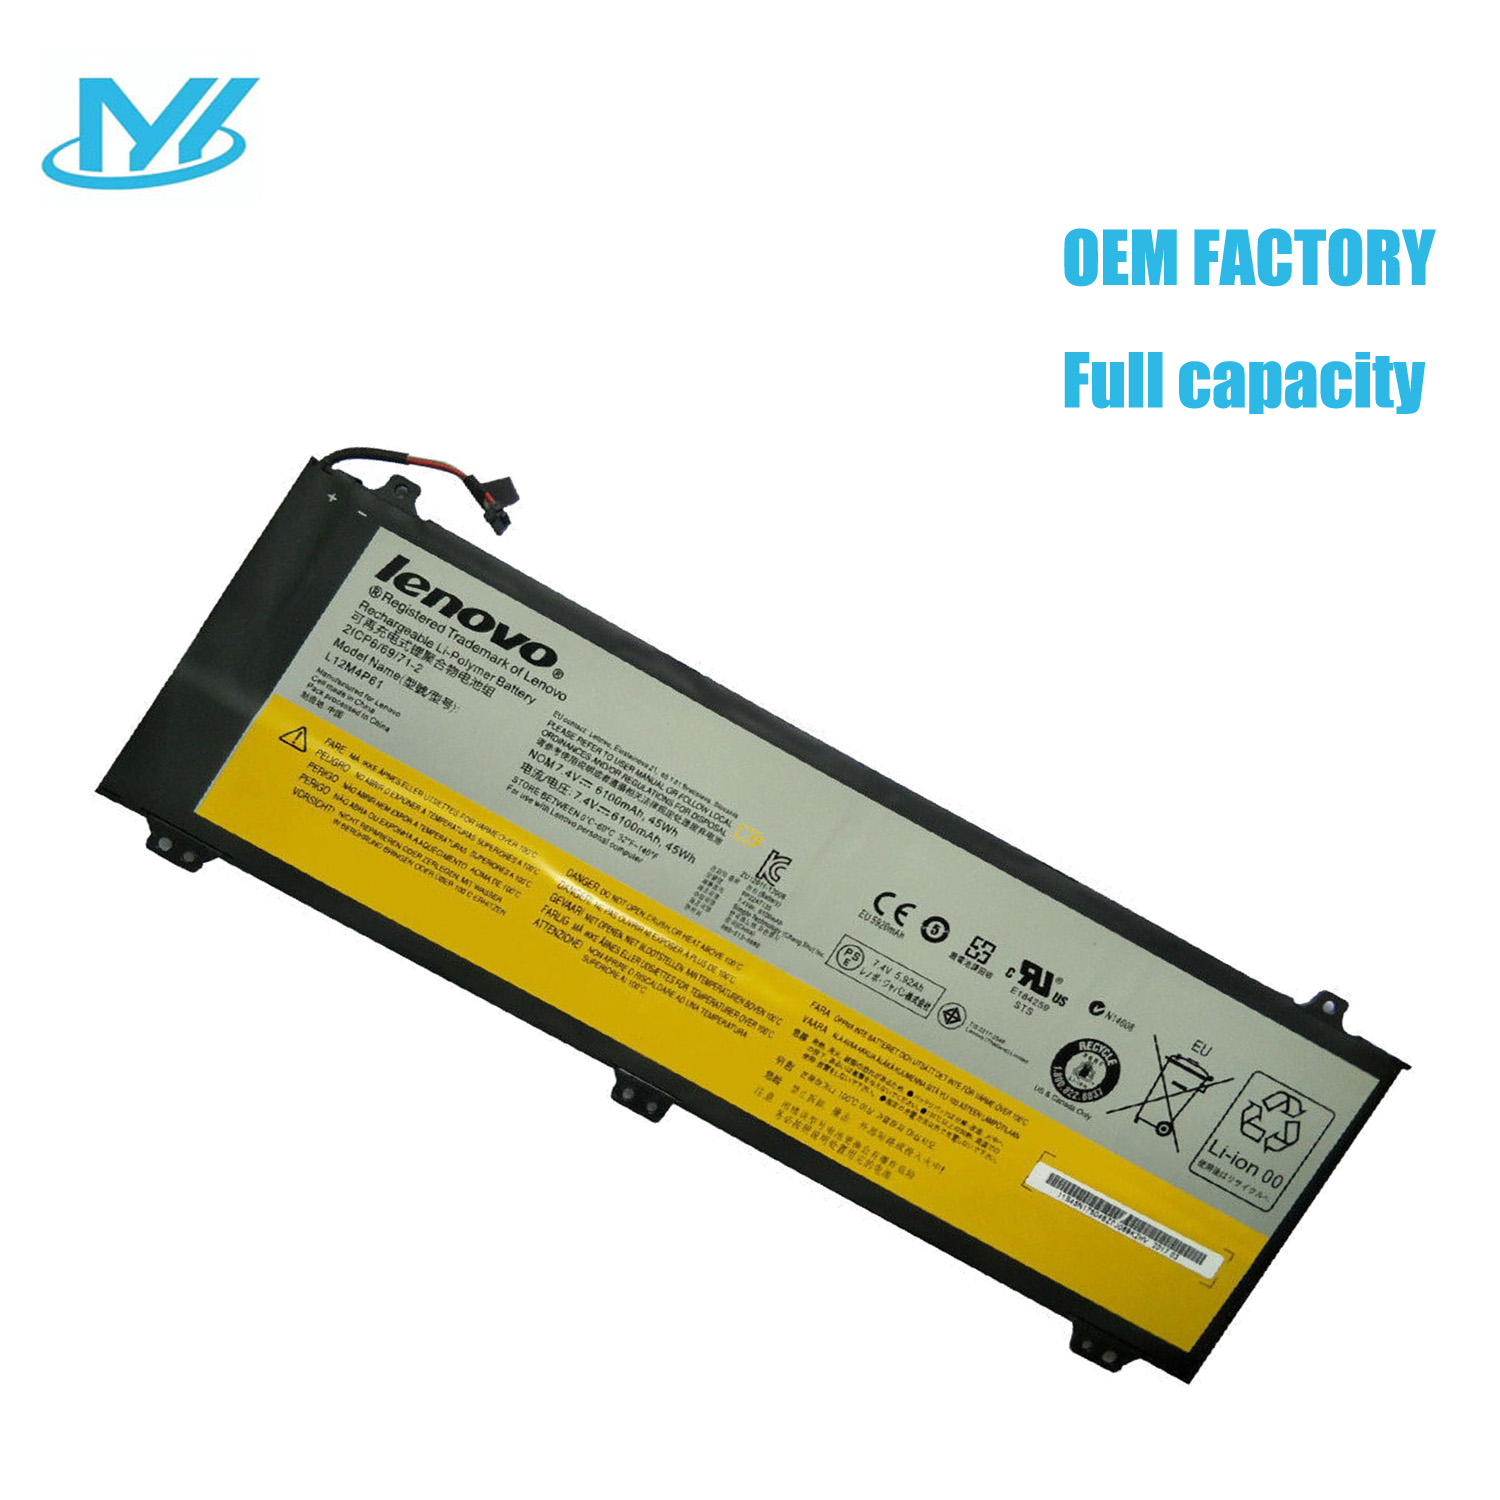 L12M4P61 rechargeable lithium ion Notebook battery Laptop battery For LENOVO IdeaPad U330t IdeaPad U330 IdeaPad U430p IdeaPad U430 IdeaPad U330 7.4V 6100mAh (45Wh) 4cell